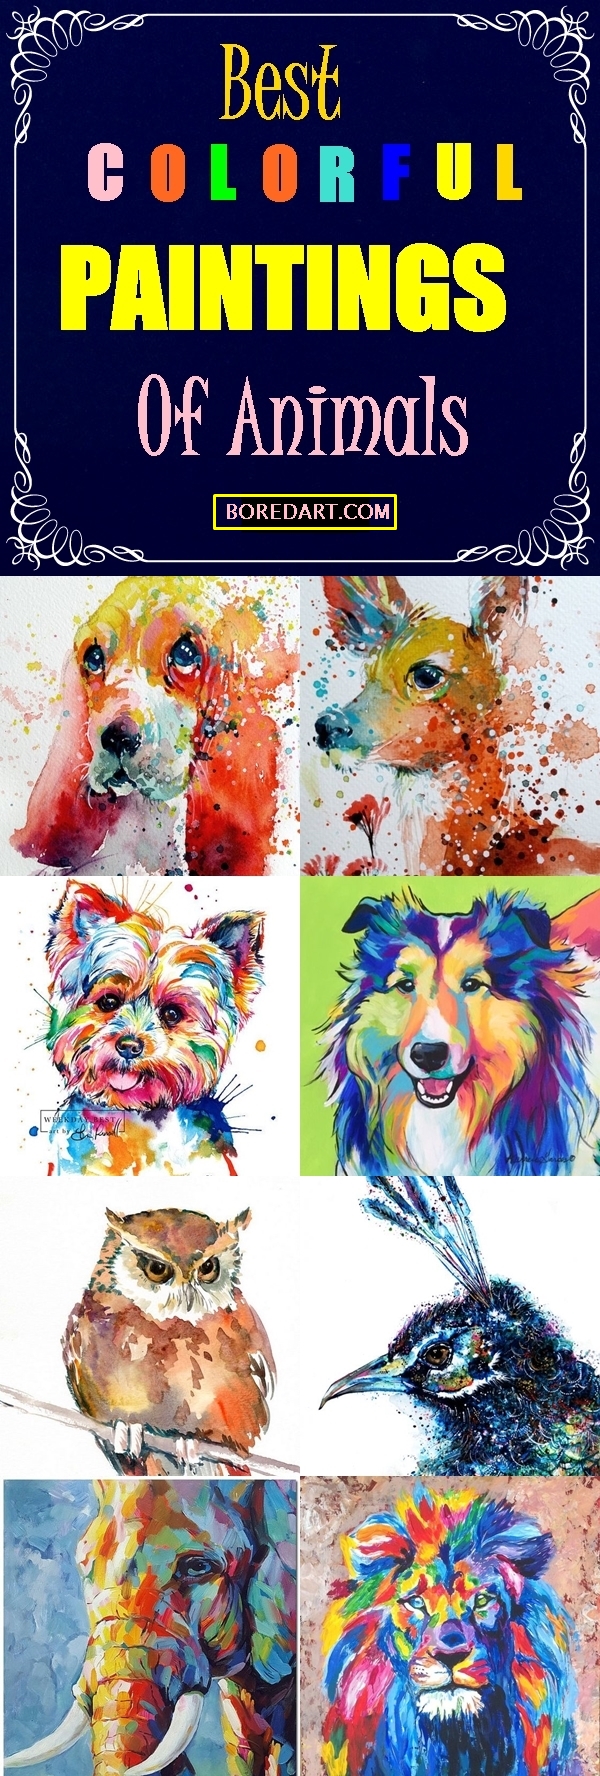 40 Best Colorful Paintings Of Animals - Bored Art